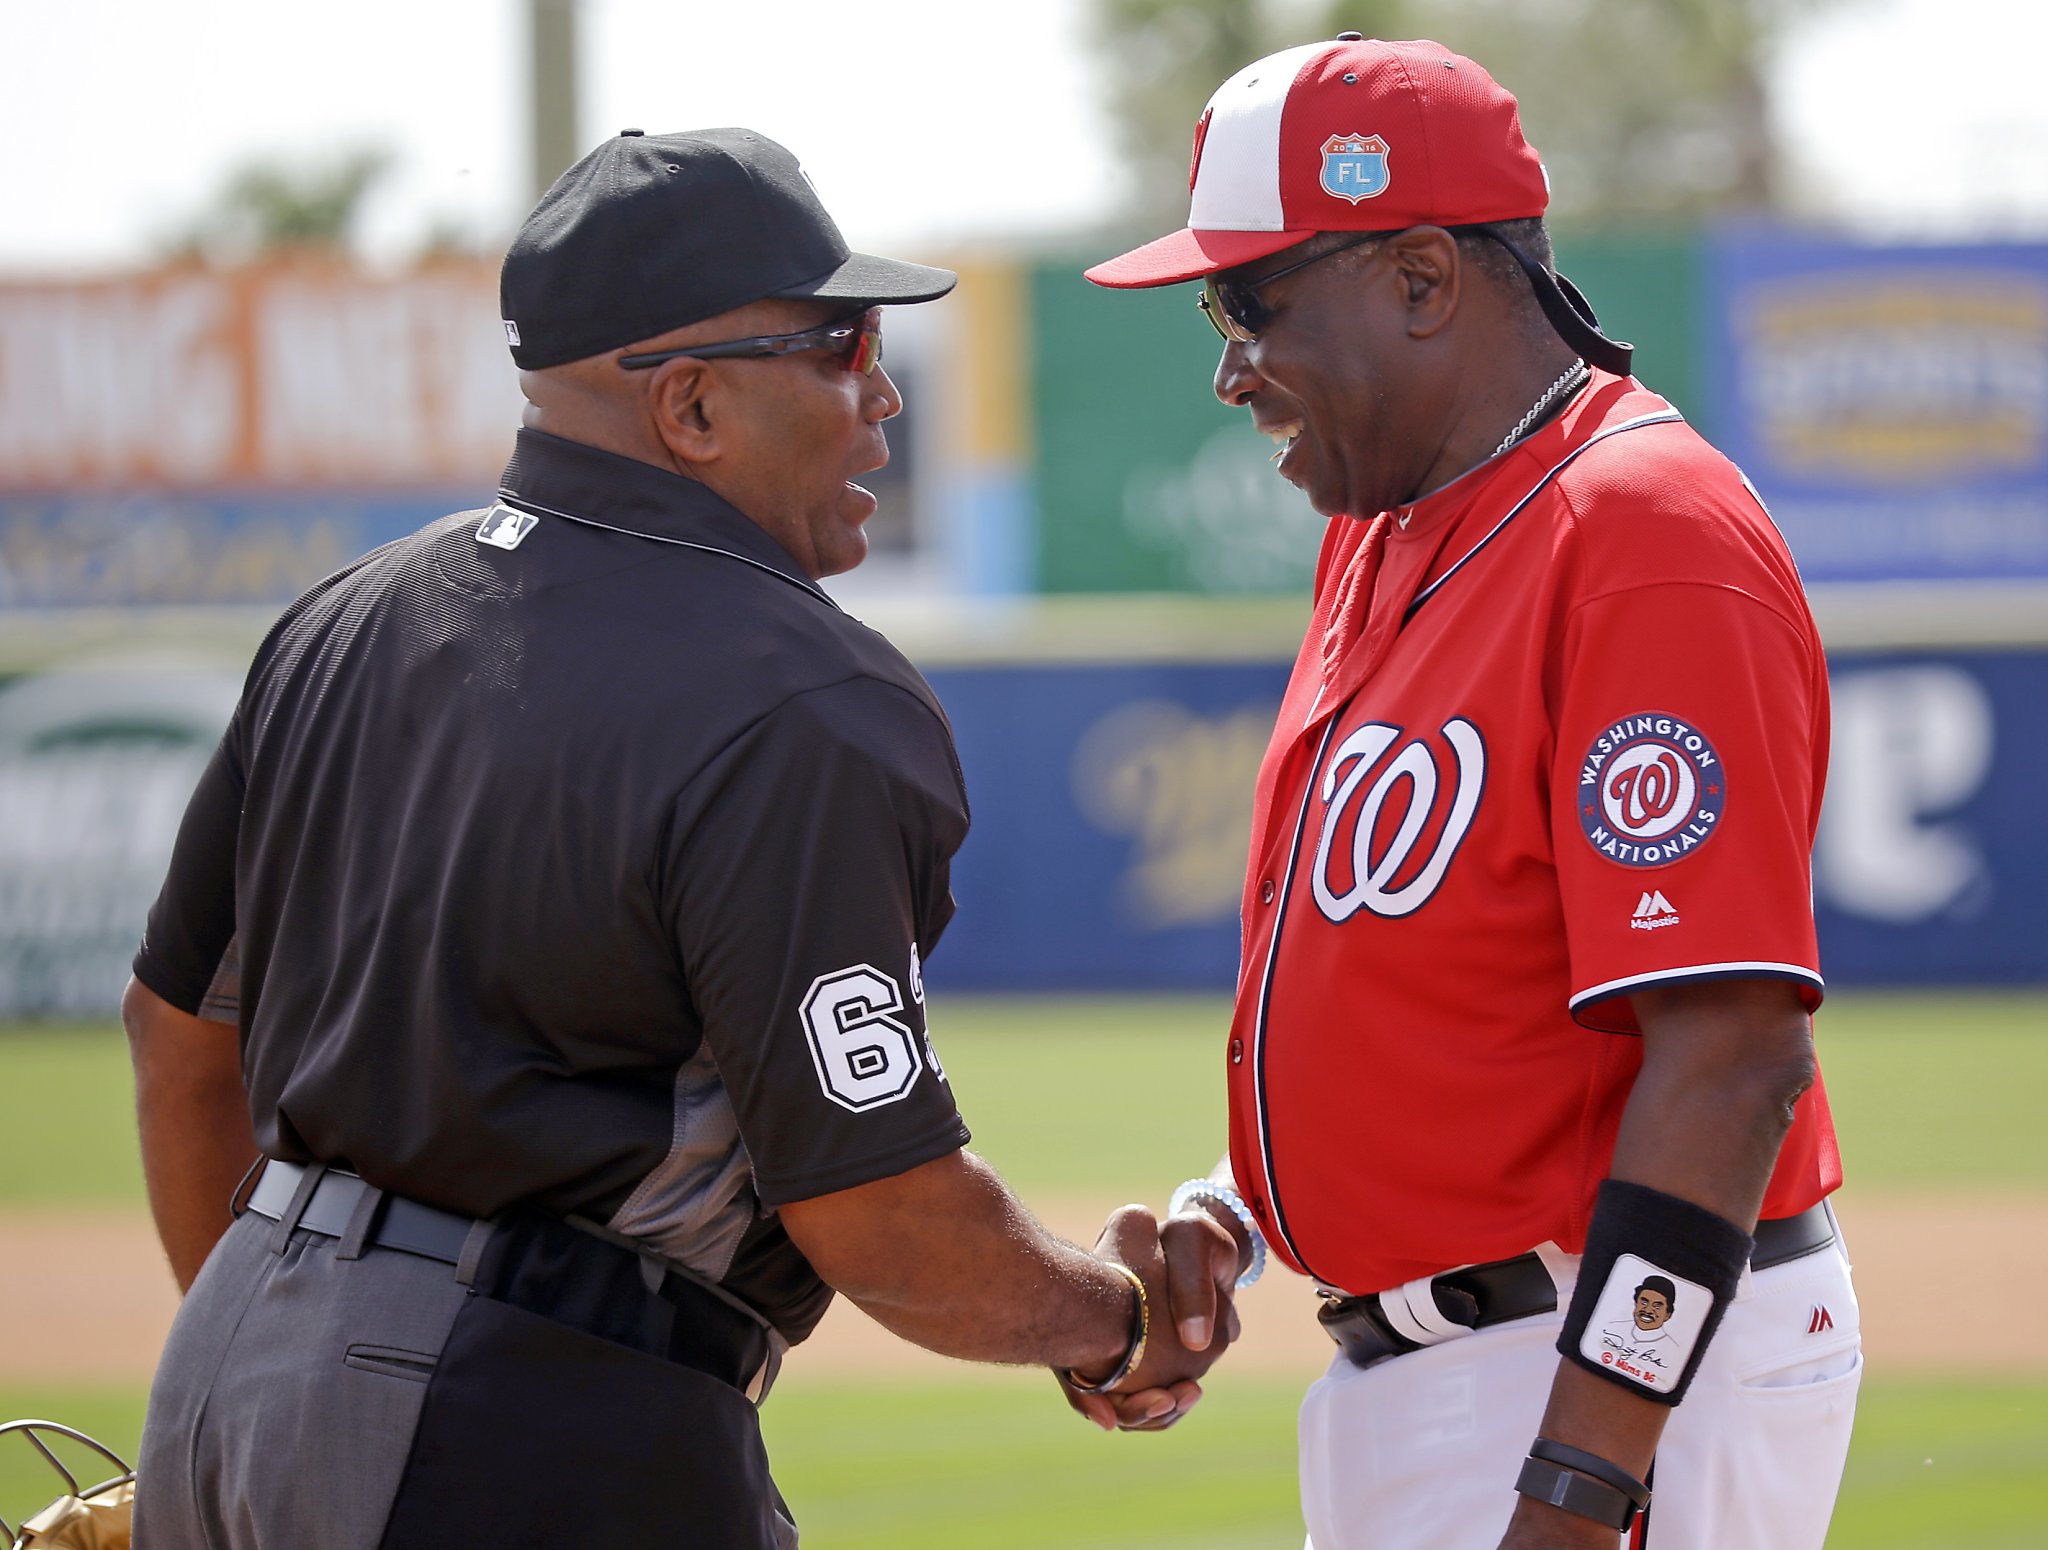 Dusty Baker Will Not Return As Nationals' Manager In 2018 - MLB